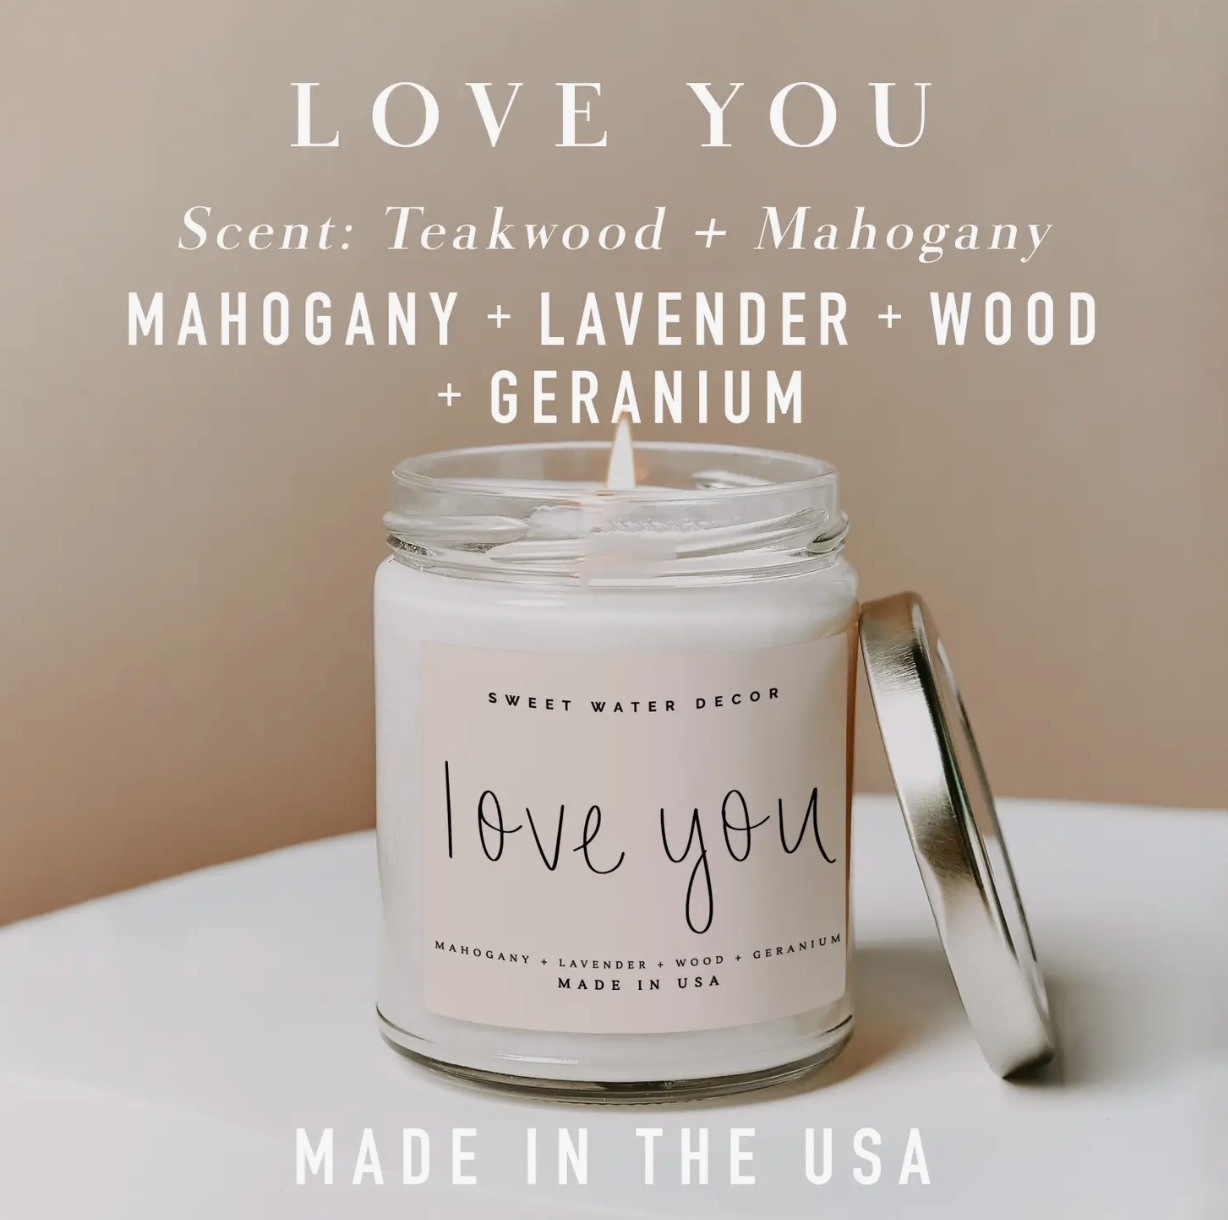 "Love You" Candle by Sweet Water Decor